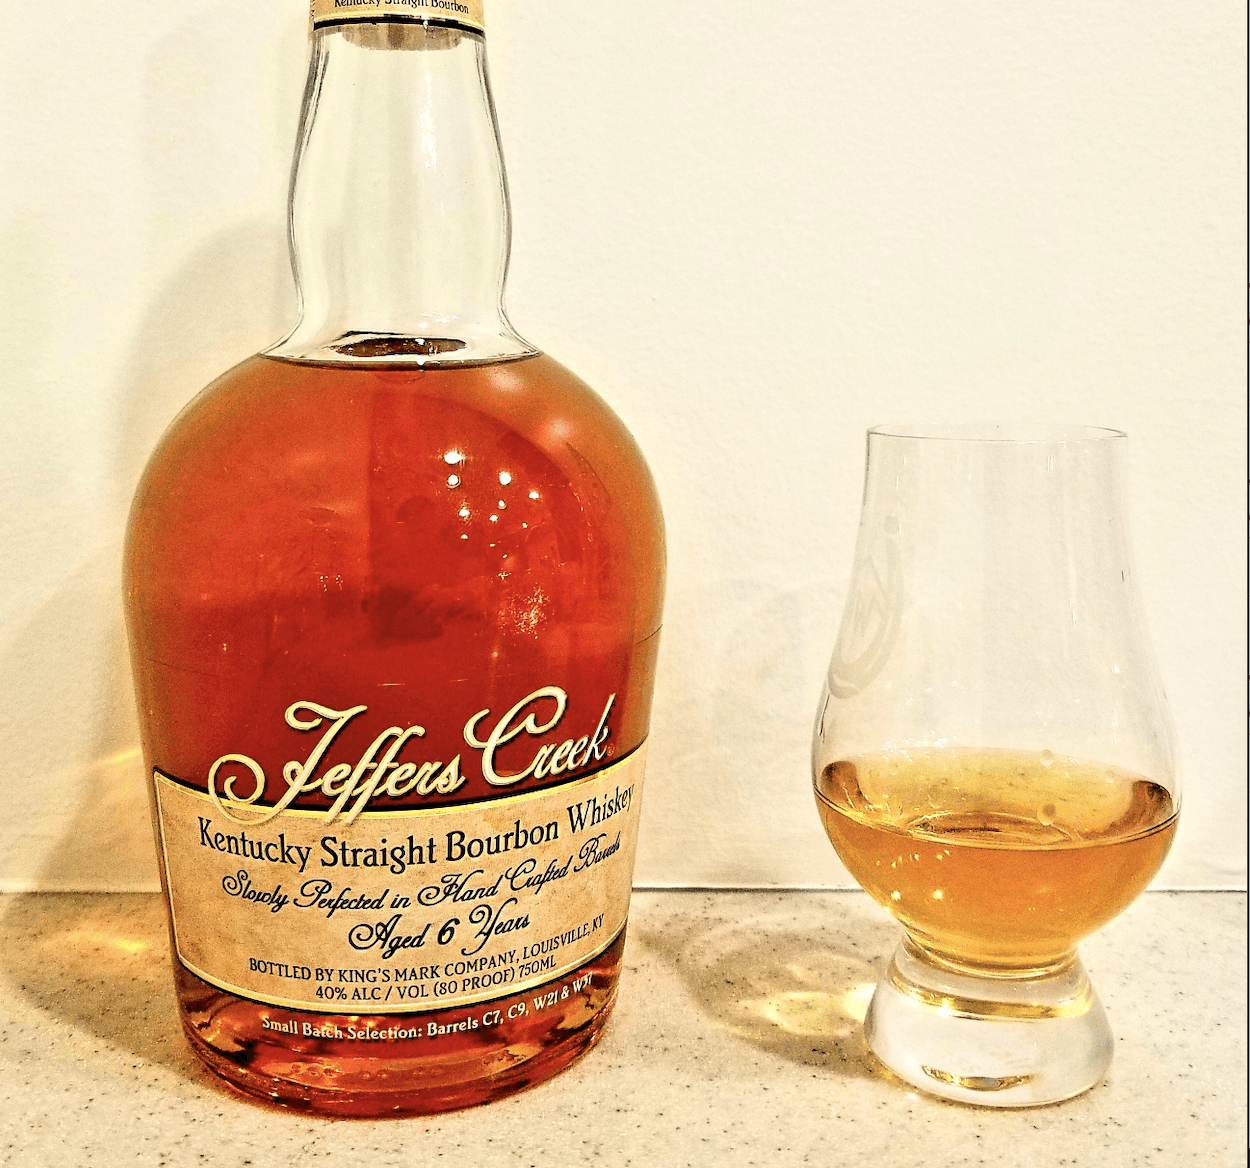 Jeffers Creek Kentucky Straight Bourbon Whiskey Aged 6 Years Review